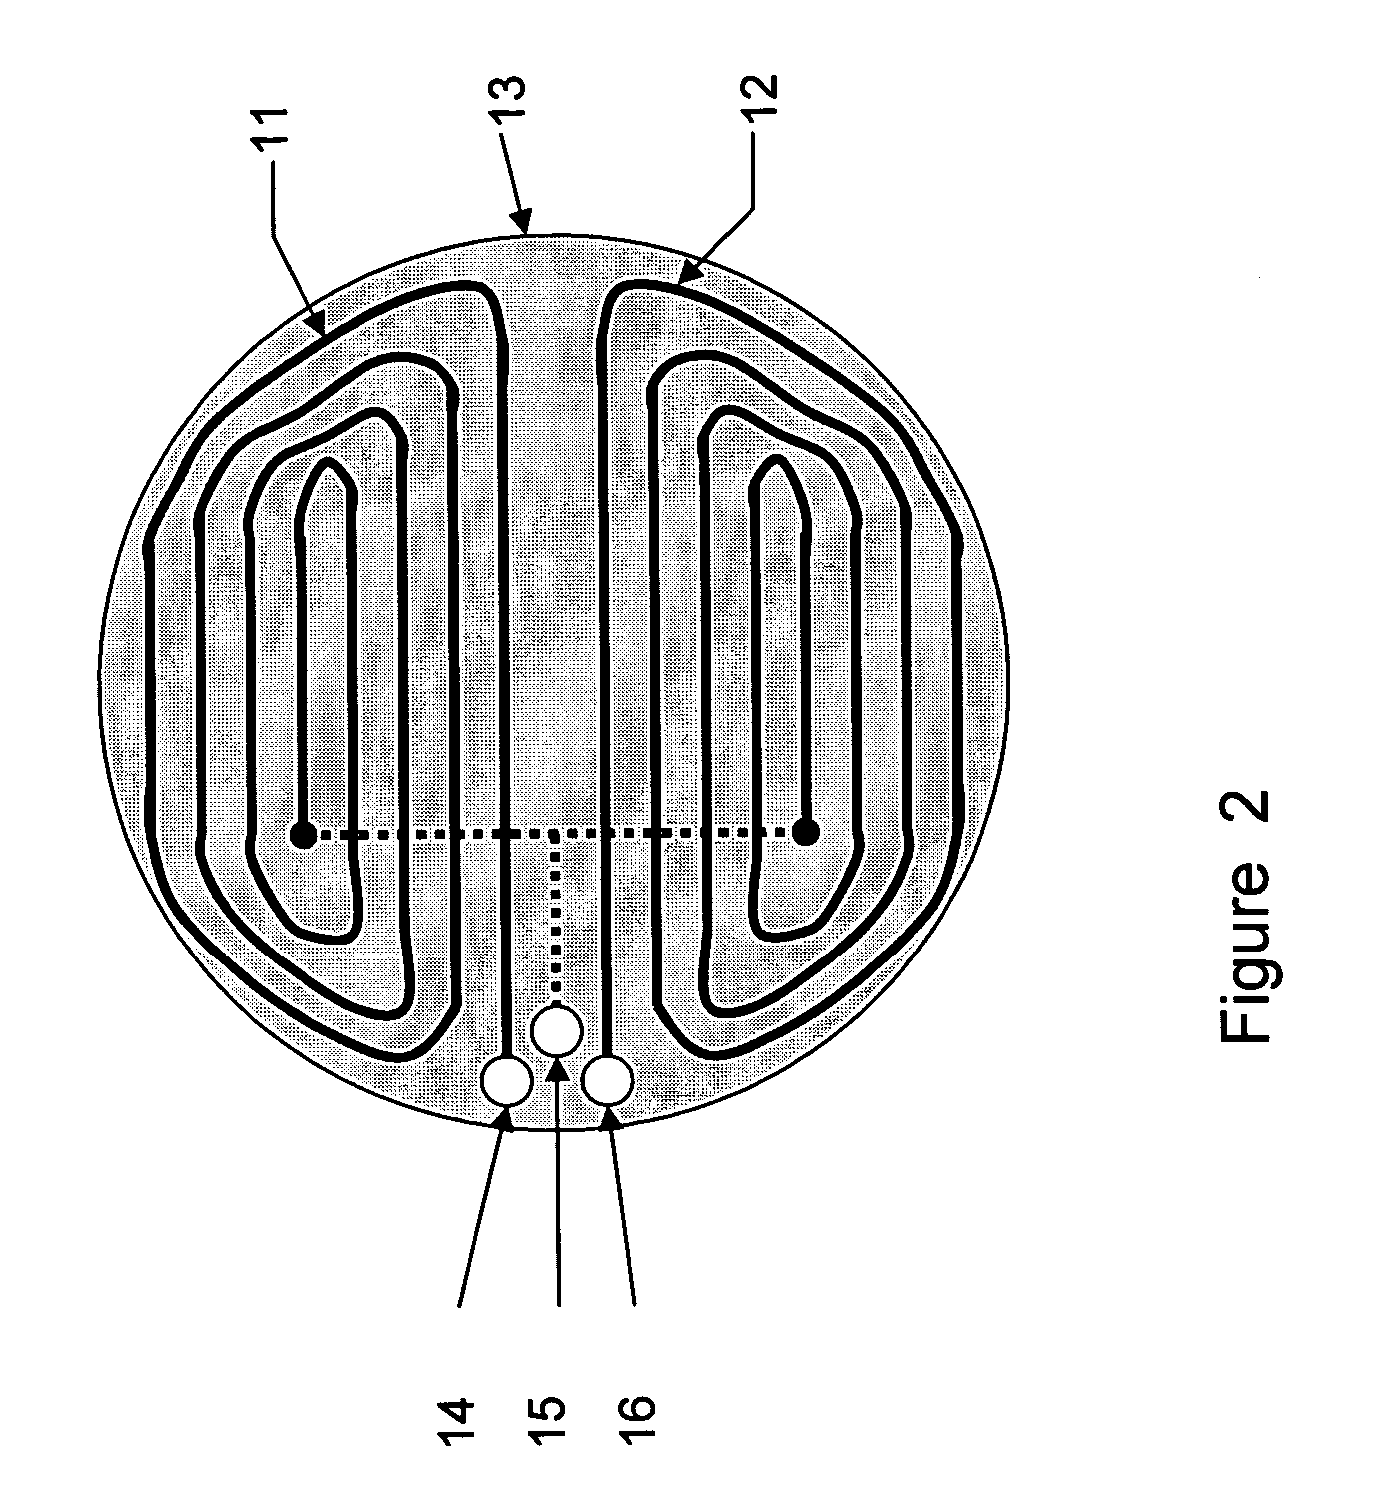 Simplified inductive position sensor and circuit configuration